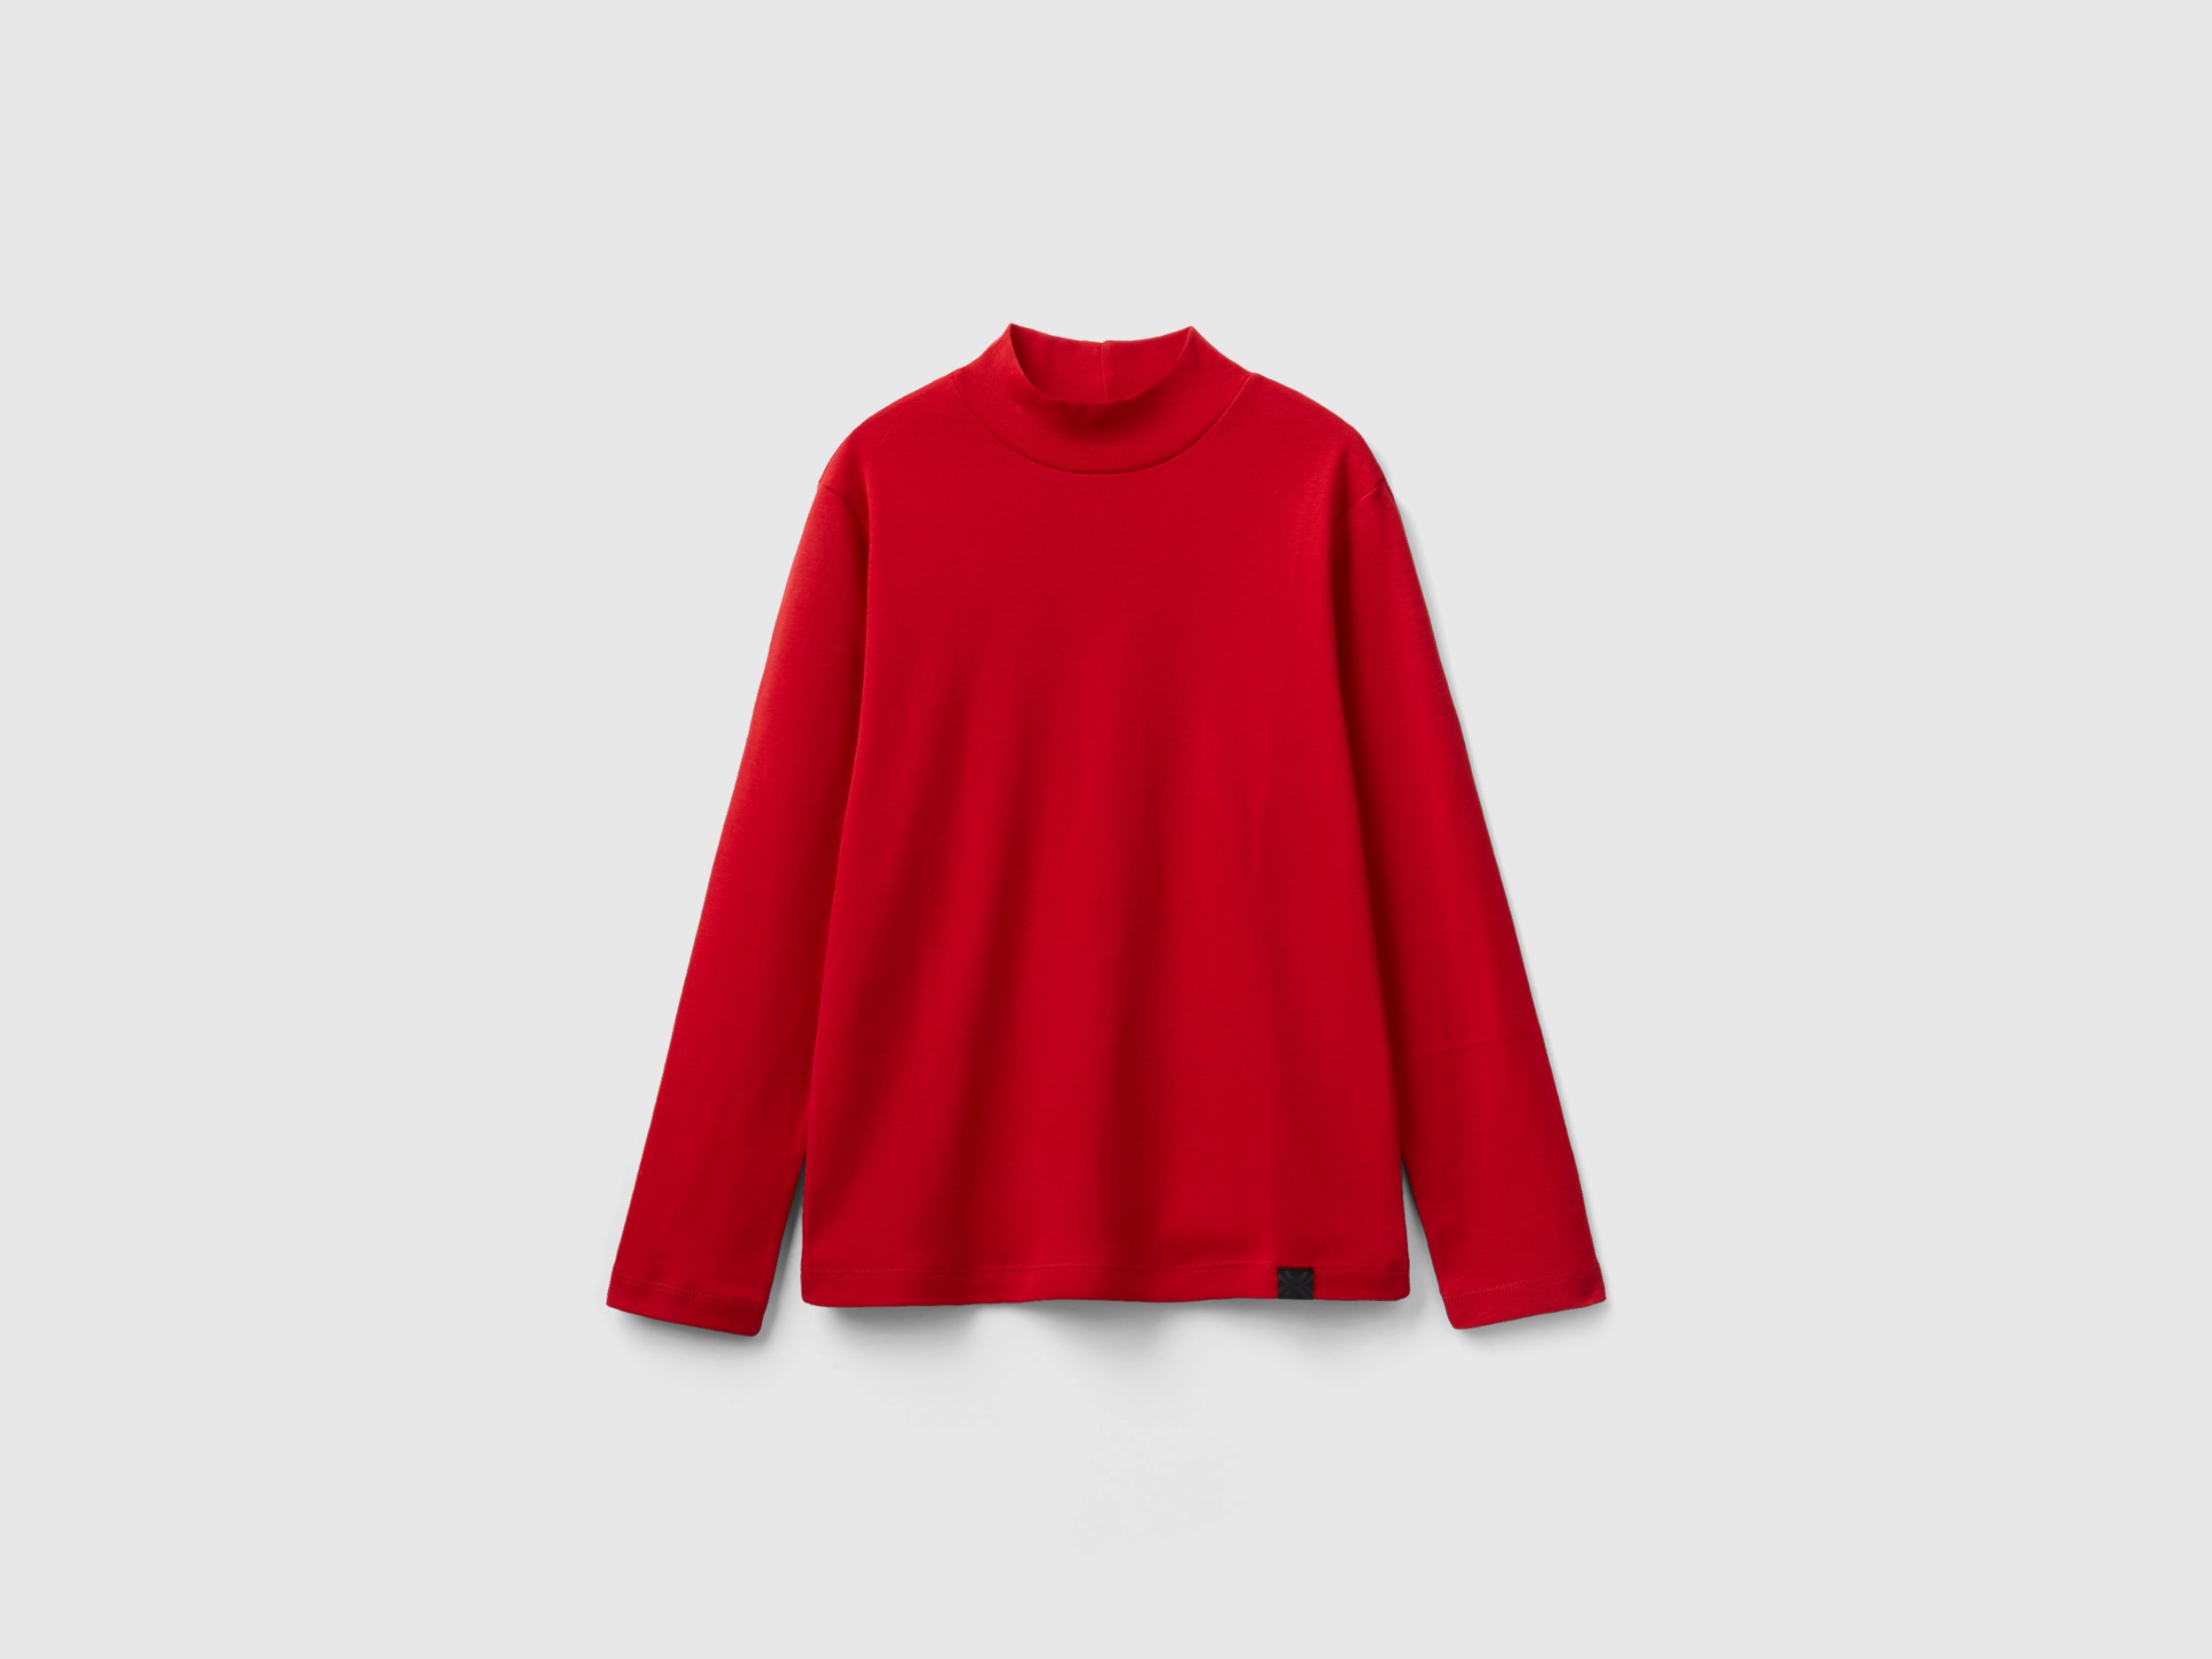 Benetton, Rubbed Knit Turtleneck T-shirt, size M, Red, Kids